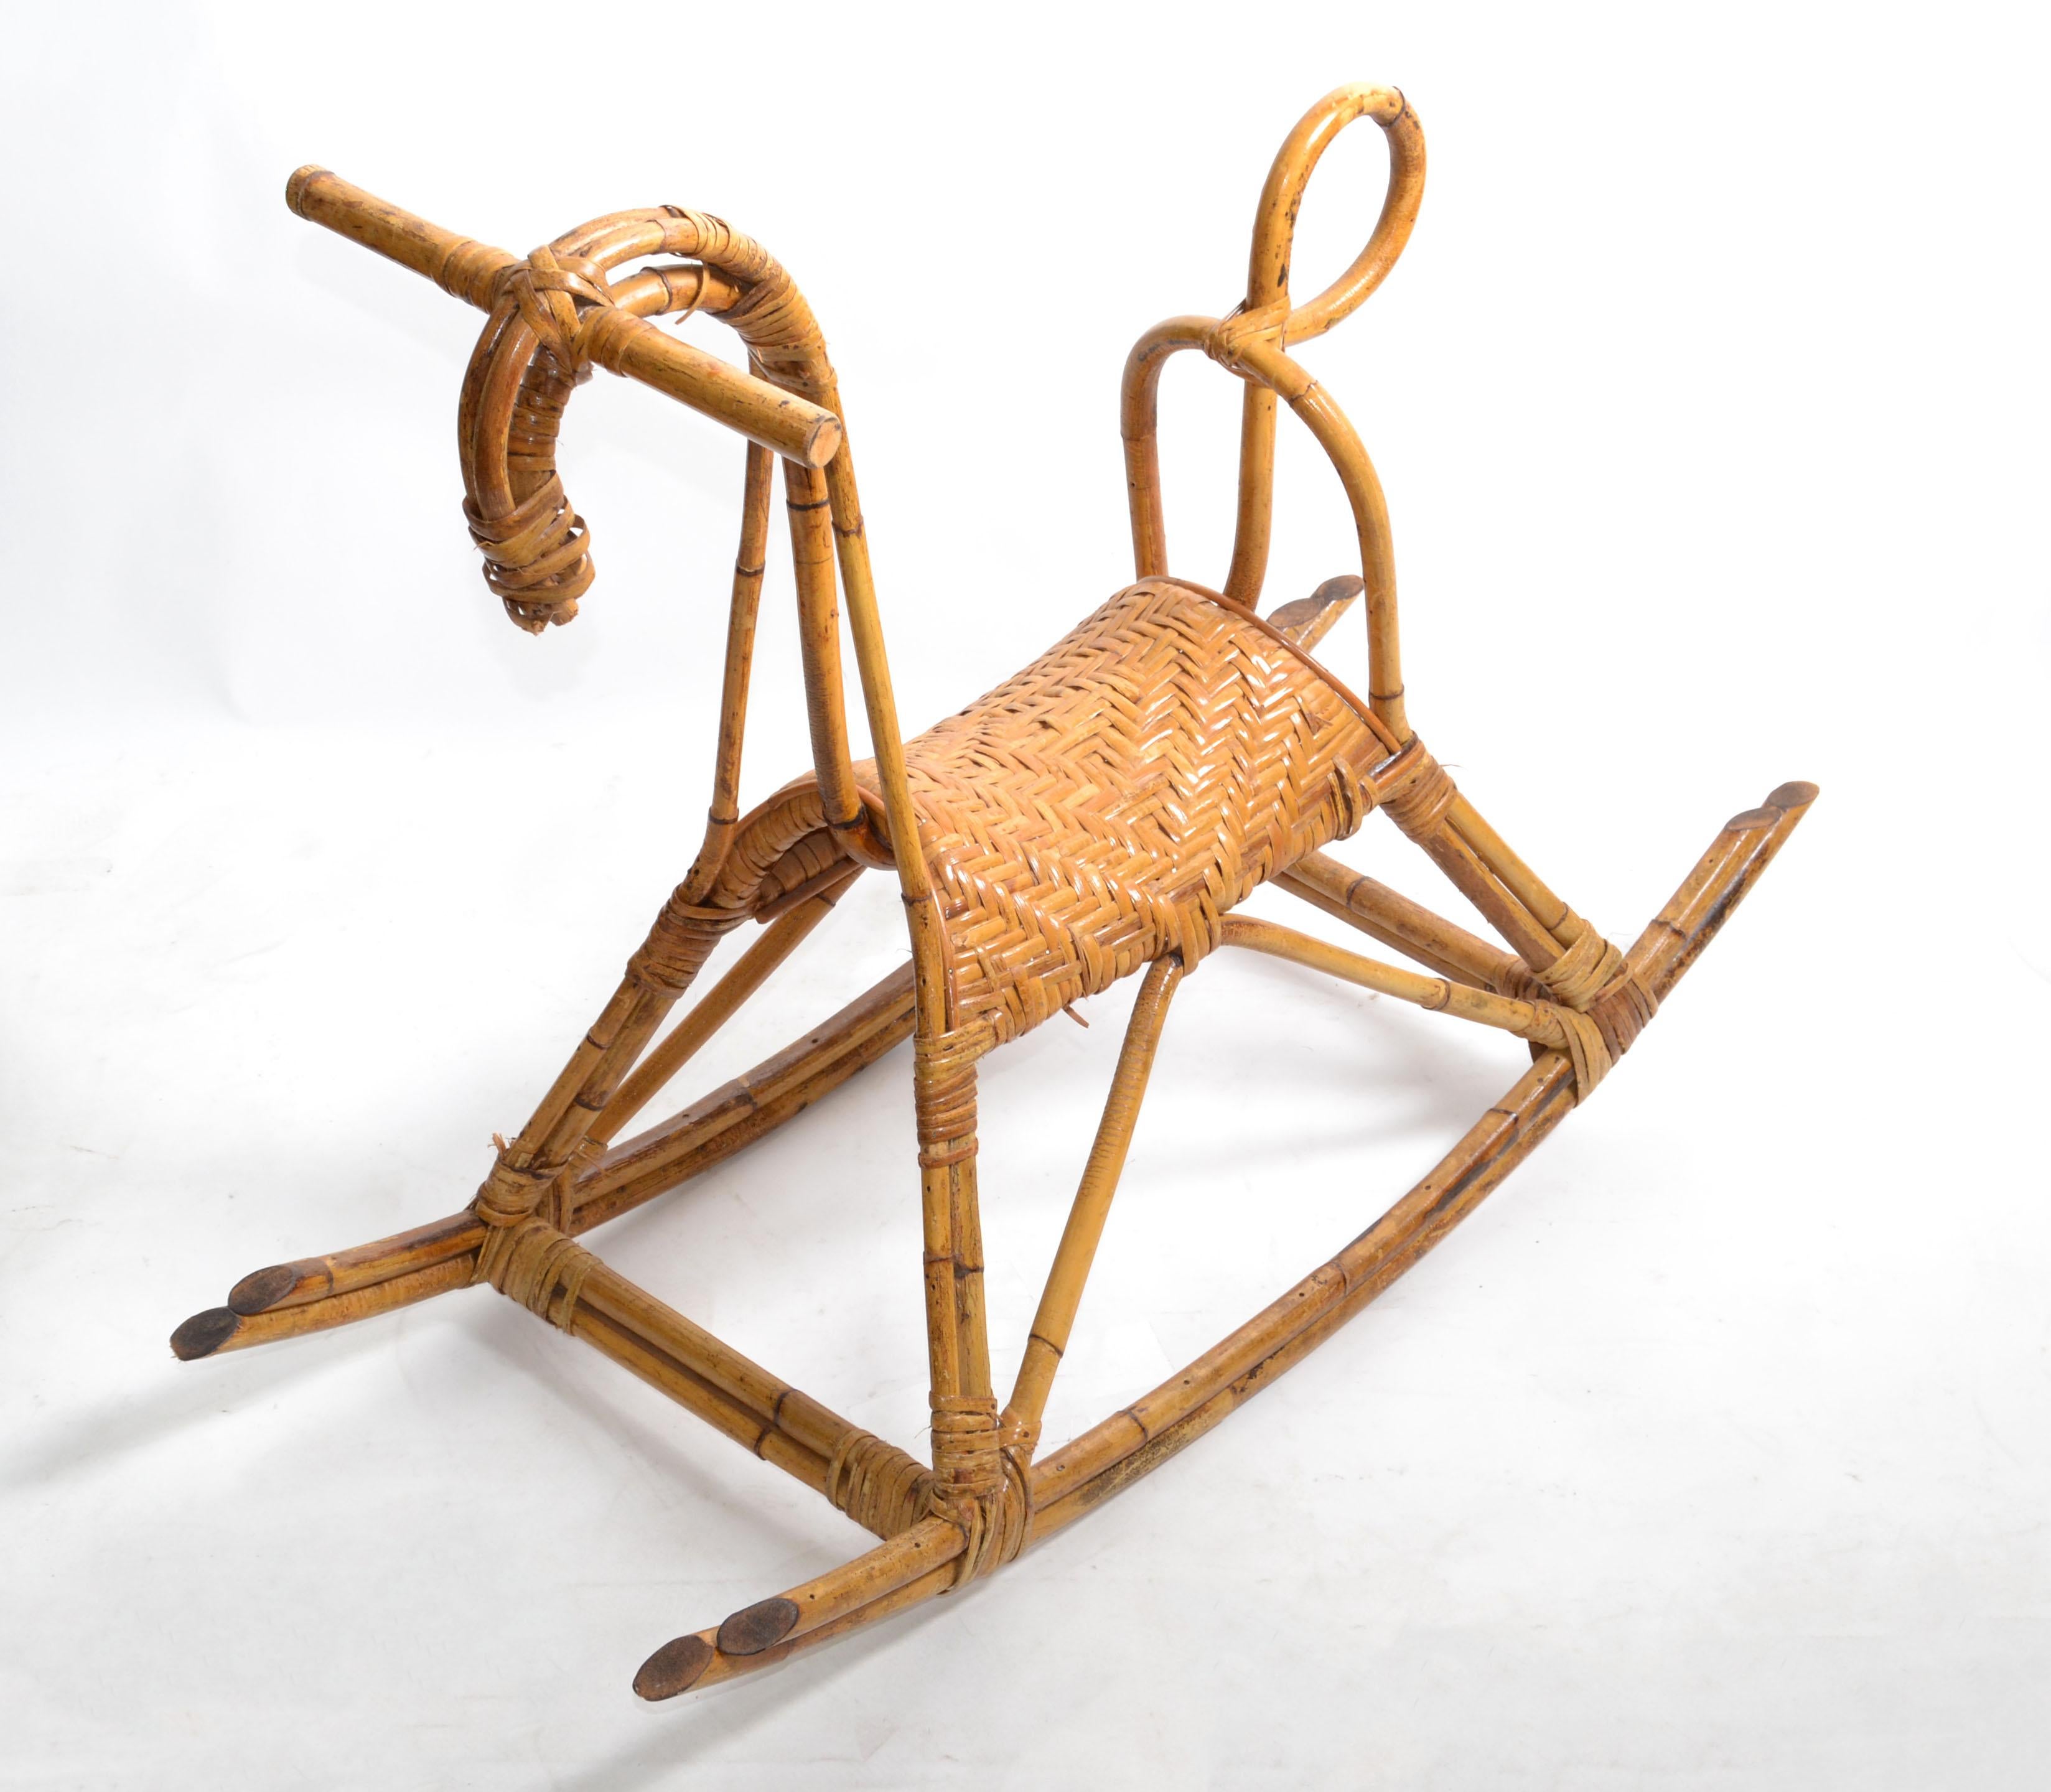 Original Franco Albini Mid-Century Modern Rattan and Bamboo Rocking Horse, Animal Sculpture. 
Rattan and bamboo rocking horse core with basket weave seat.
This horse brings joy to small and big children.
A great midcentury design.